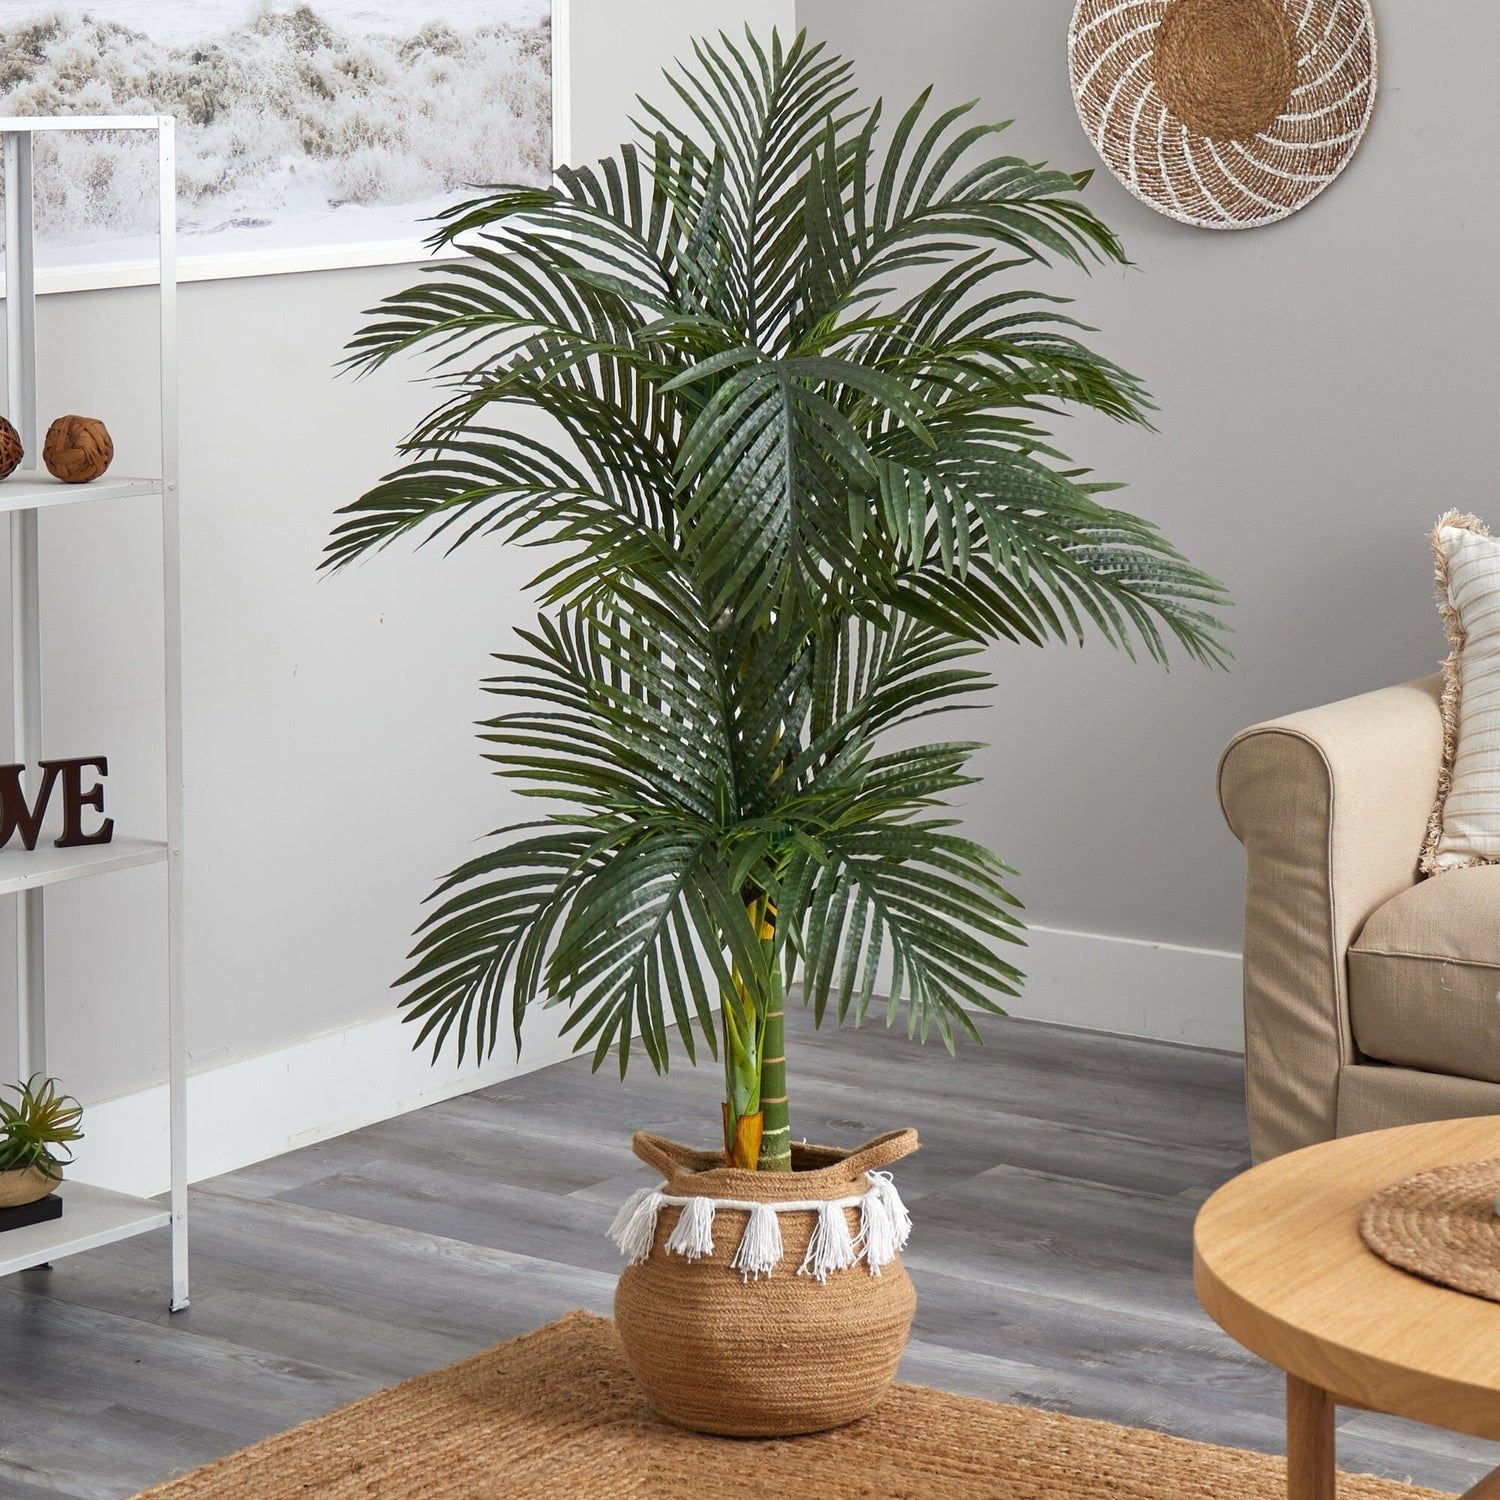 5’ Artificial Double Stalk Golden Cane Palm Tree with Handmade Woven Cotton Basket